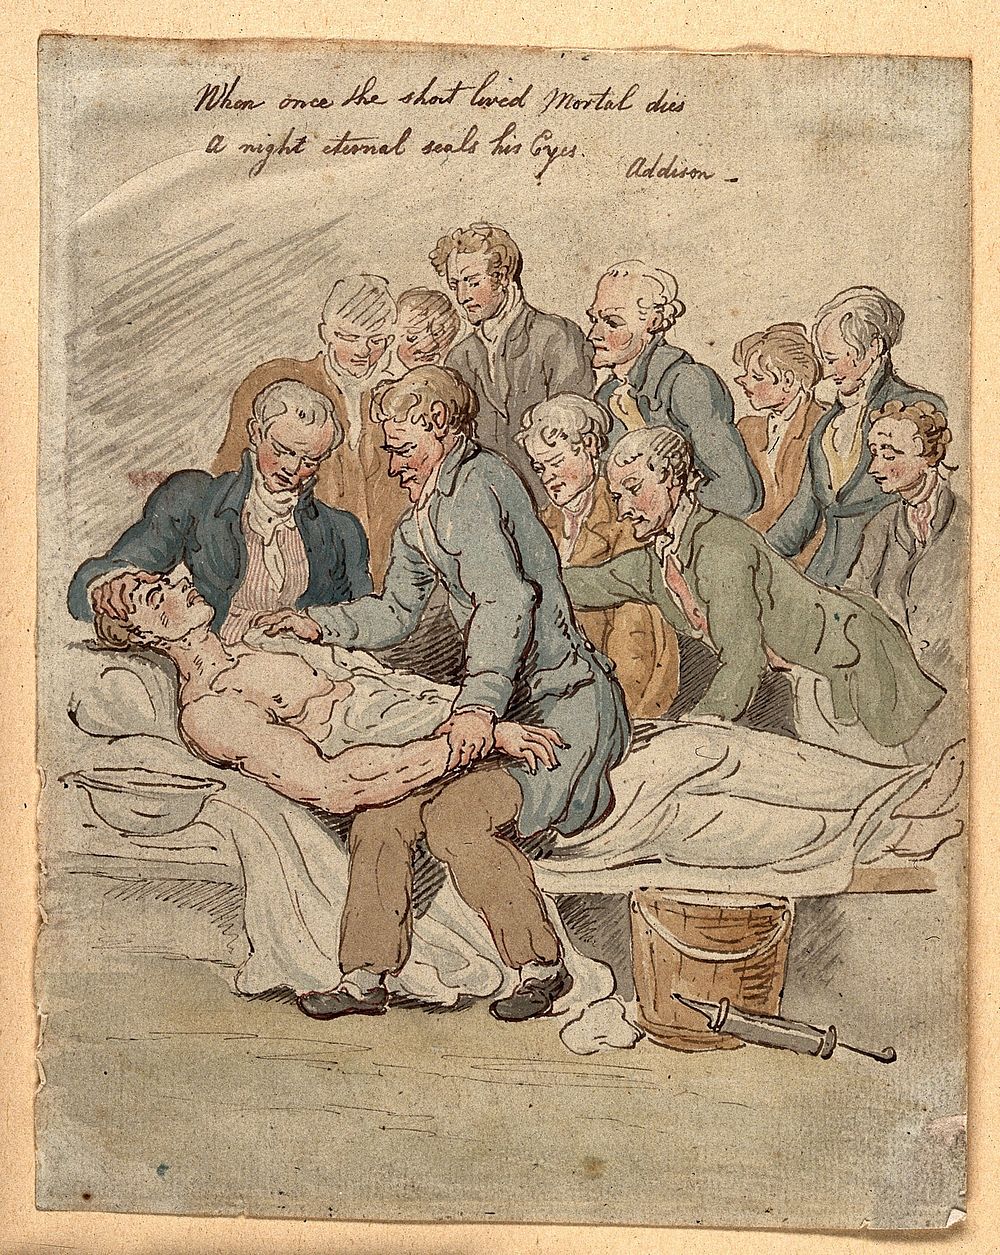 A group of doctors and medical students surround a dying patient. Watercolour attributed to T. Rowlandson.